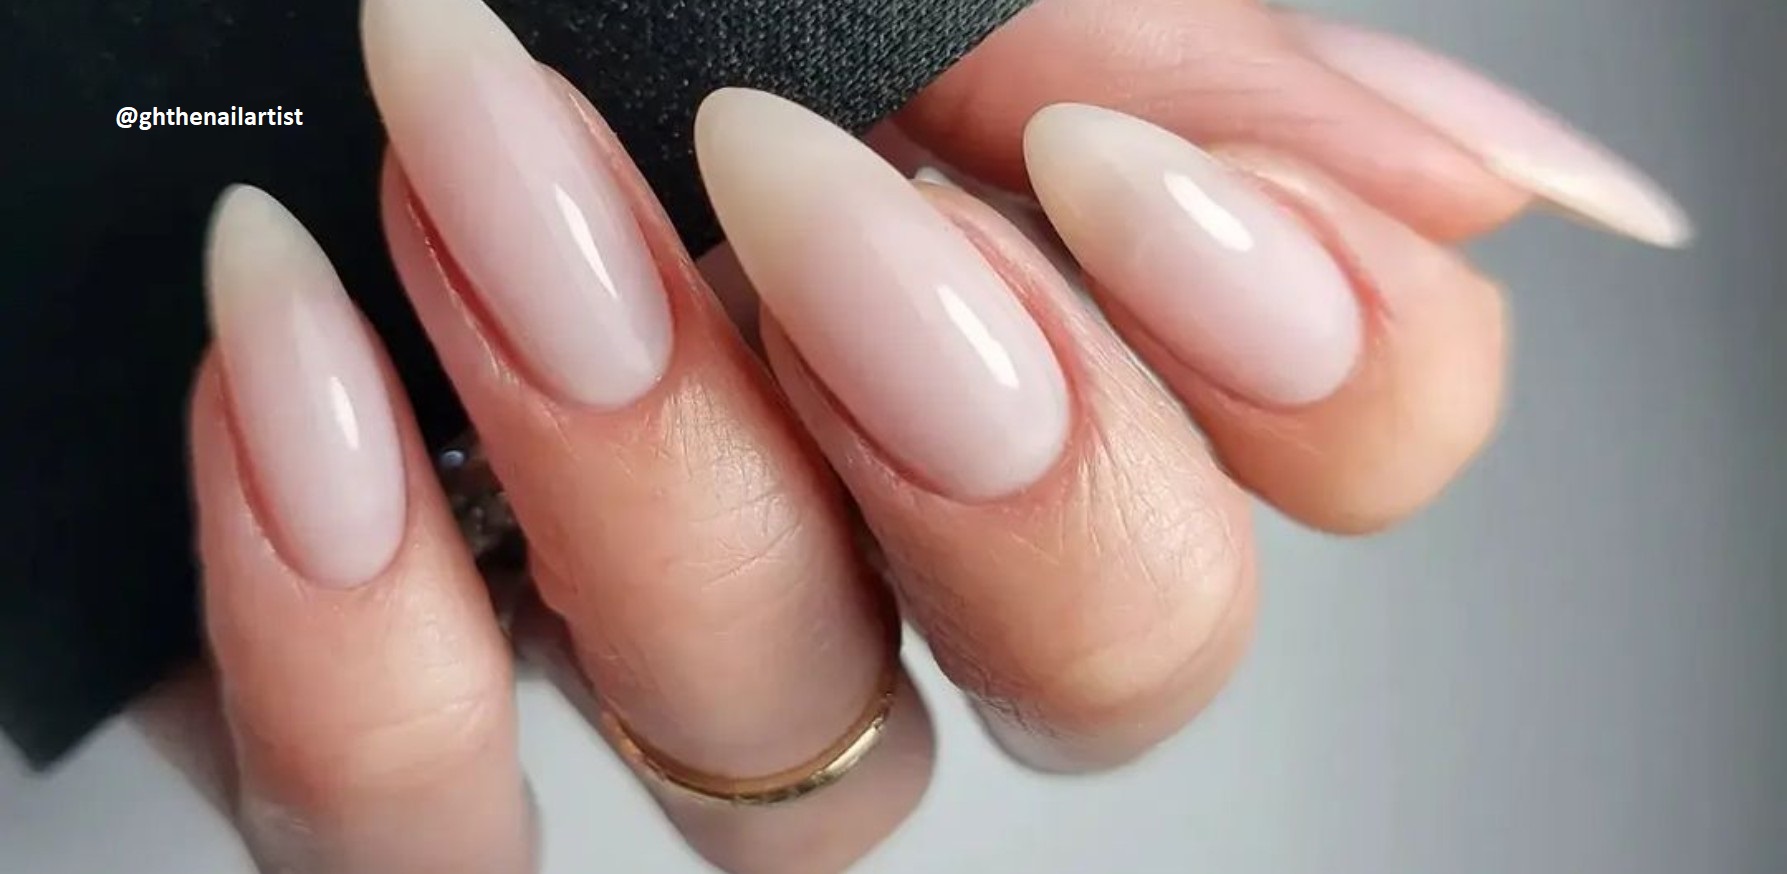 Lip Gloss Nails Are The Trendiest Go-To Spring Mani